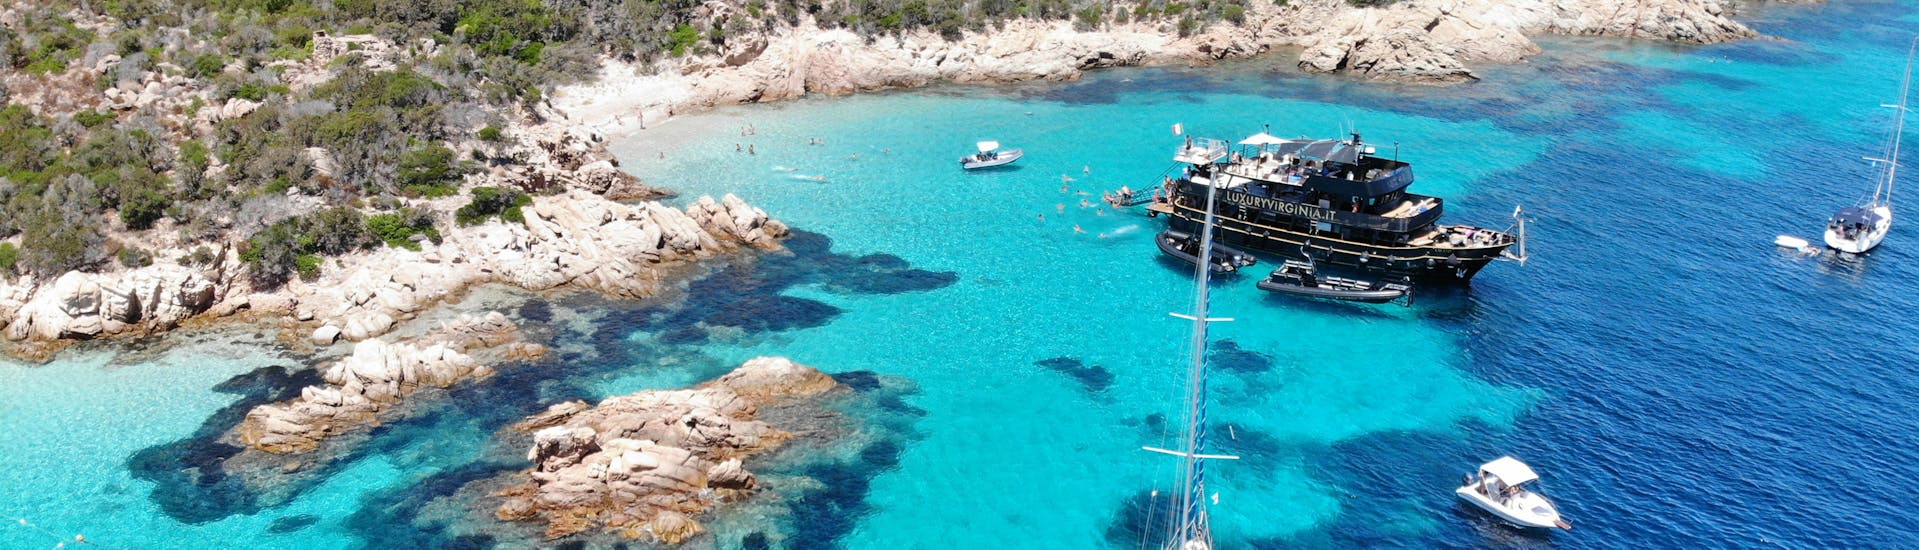 Our boat is stopping for one of the swimming stops during the Luxury Boat Trip from Cannigione and Baja Sardinia to La Maddalena.